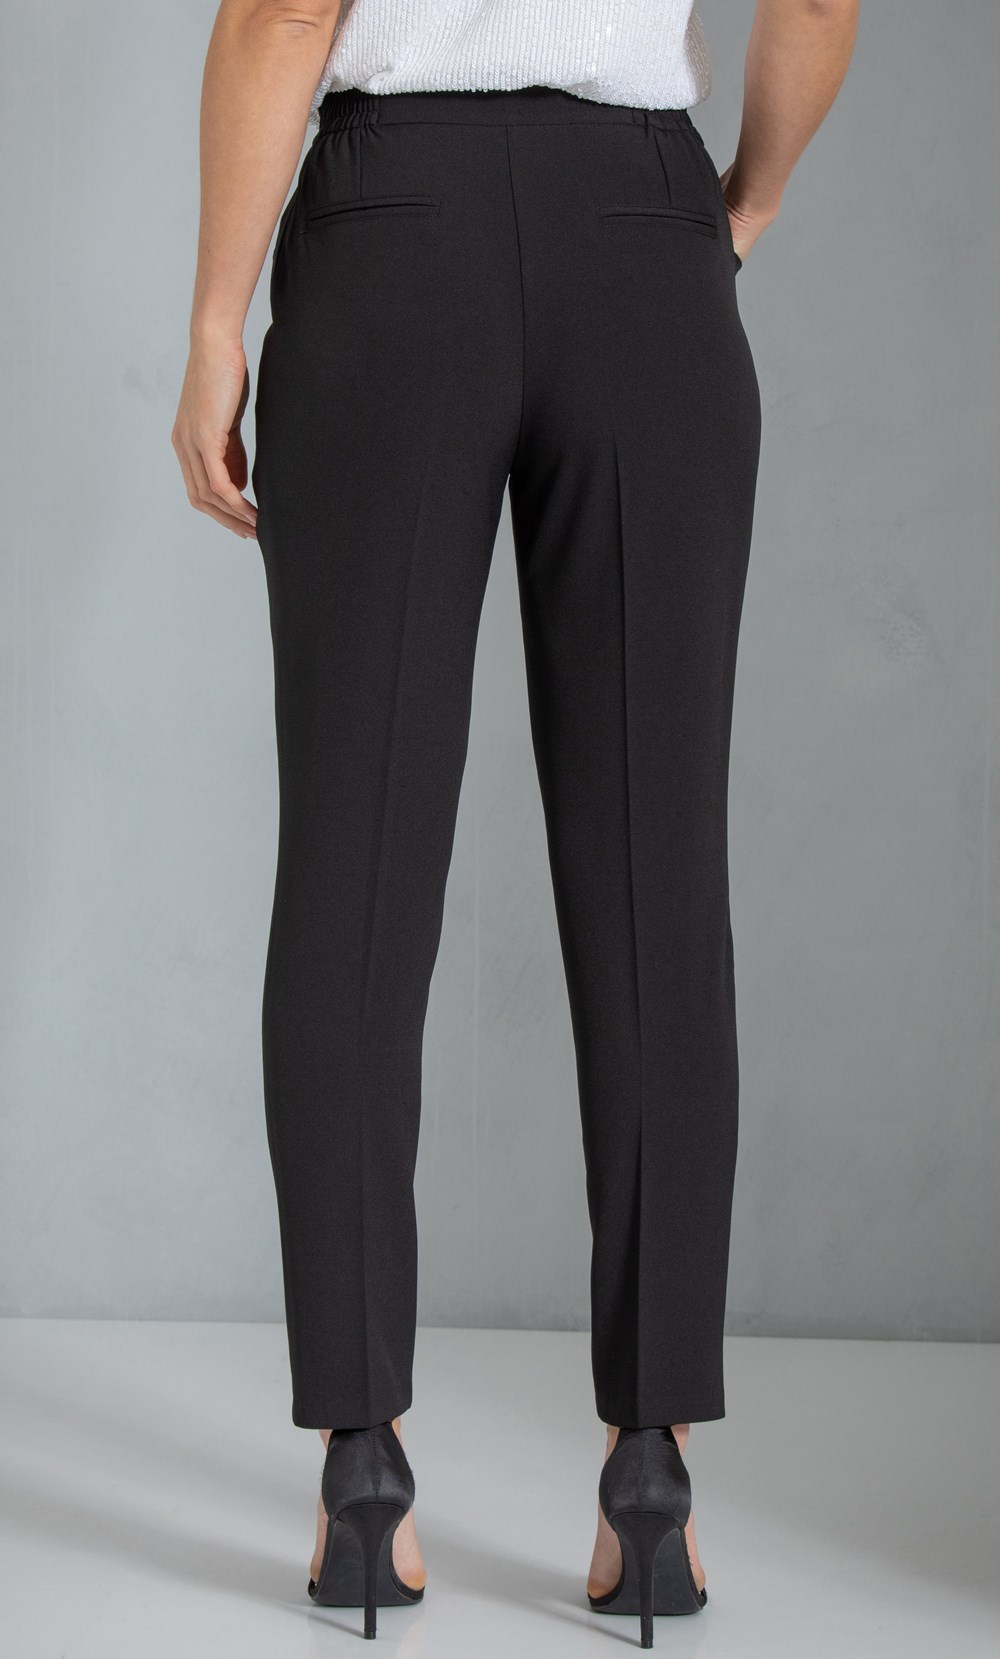 Black High Waist Tapered Trousers | New Look